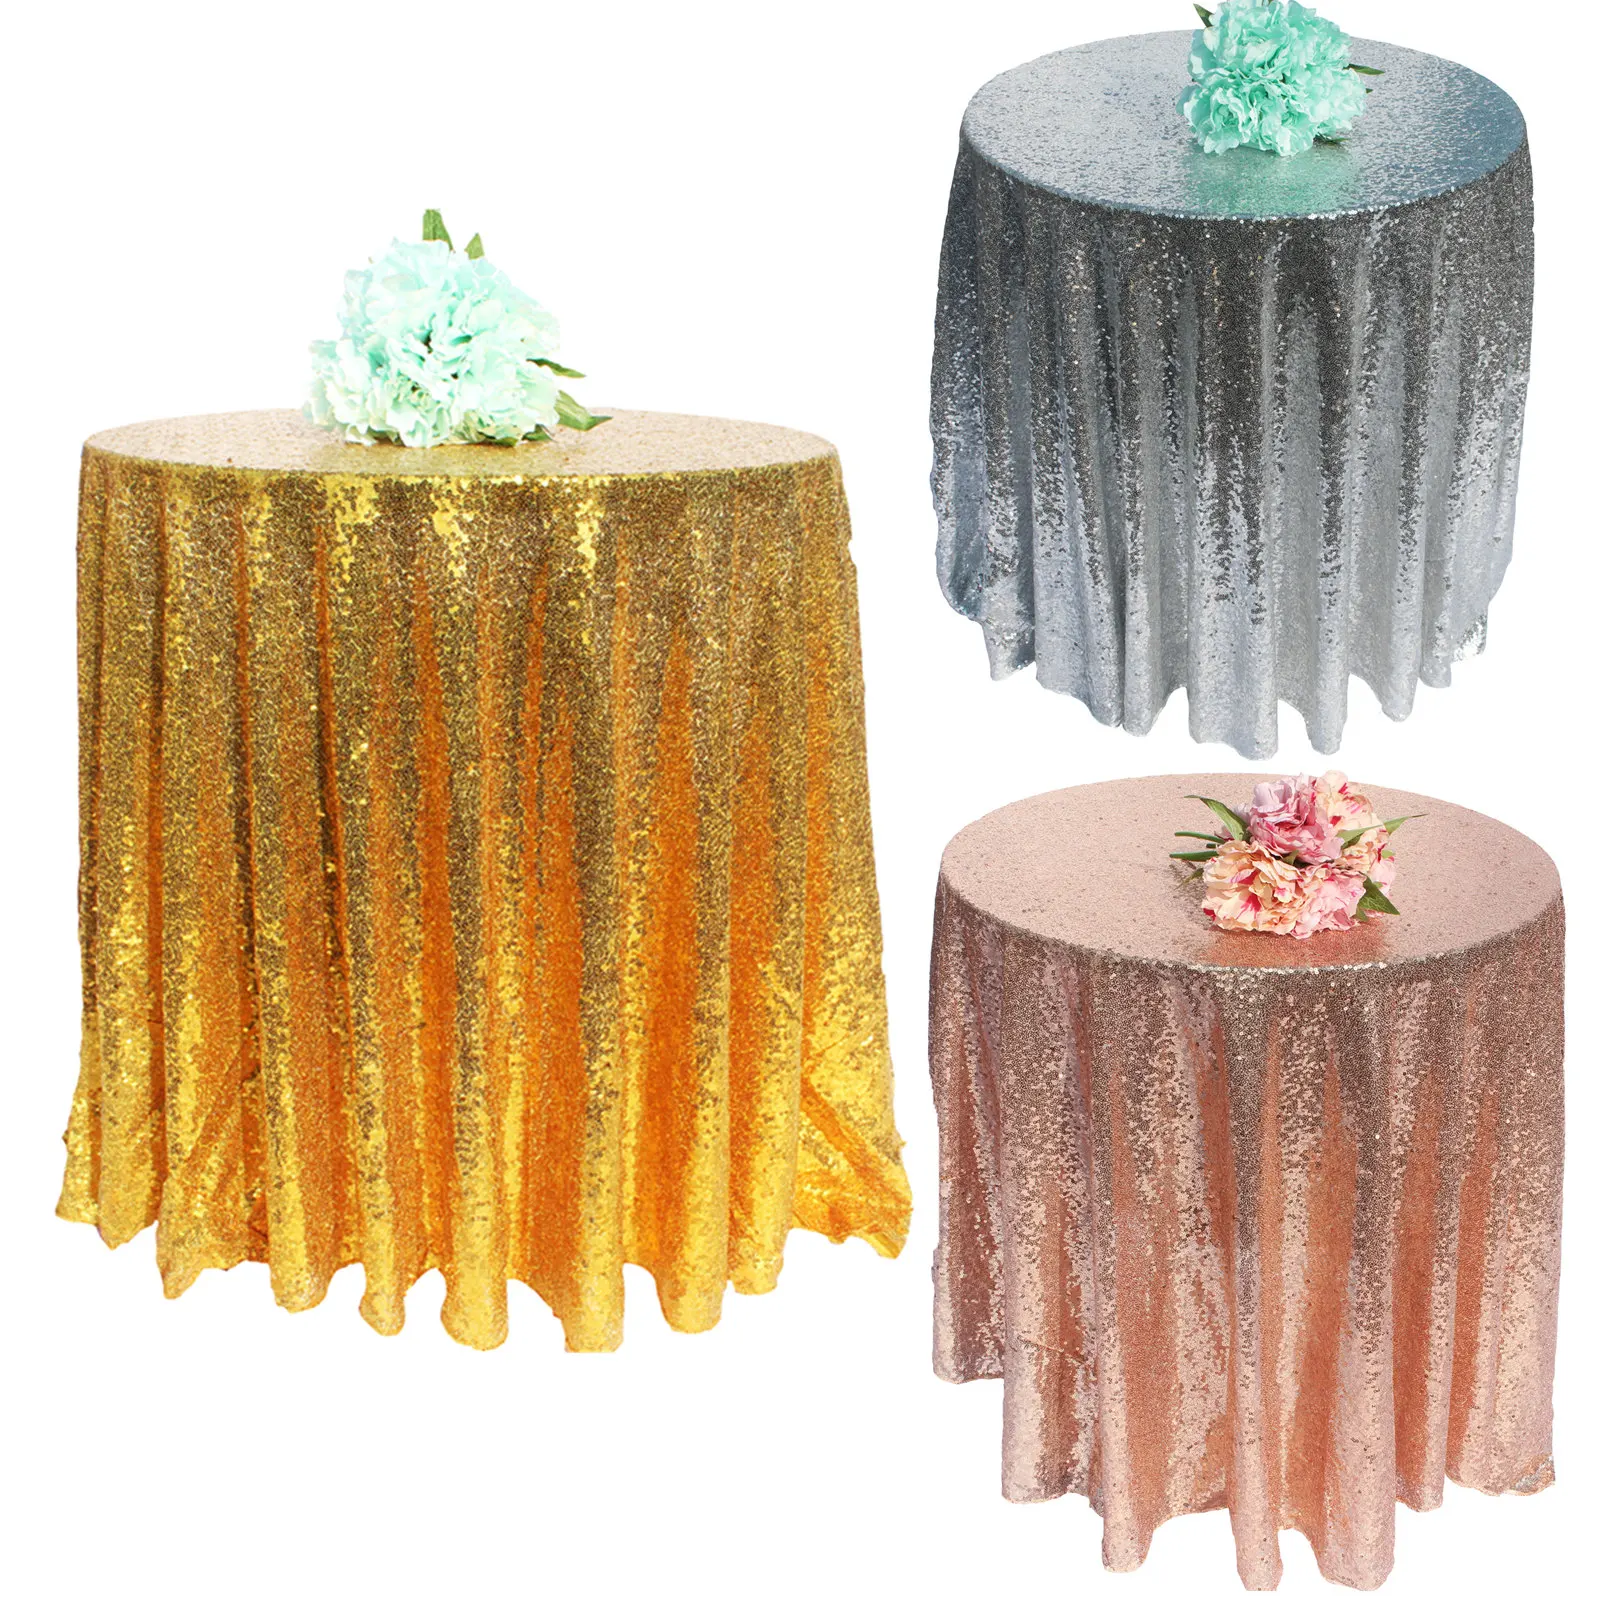 Tablecloth Sequin Glitter Table Cloth Wedding Round&Rectangular Elegant Table Cover for Decoration Party Banquet Home Decor